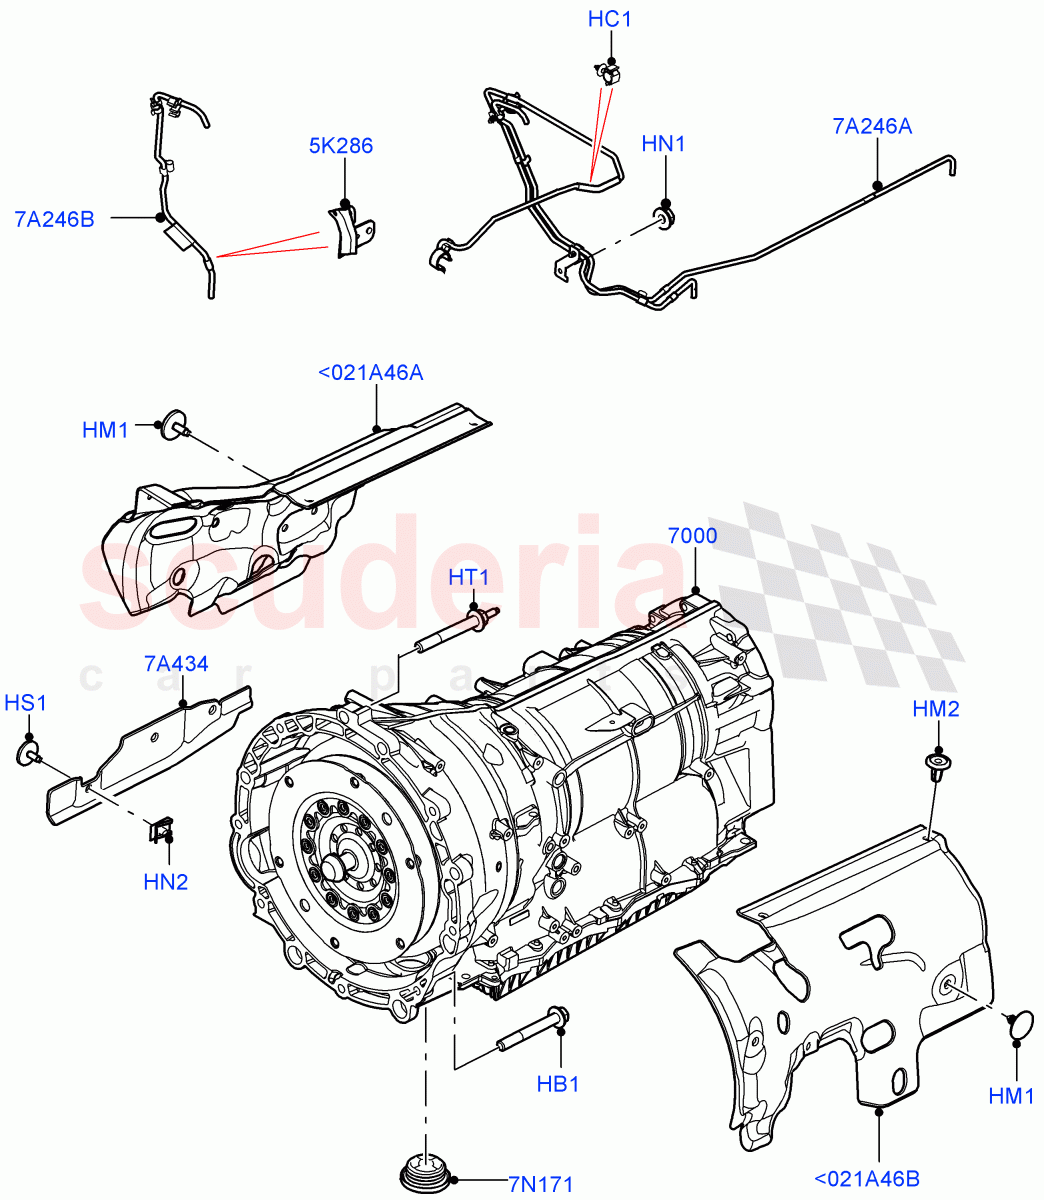 Auto Trans Assy & Speedometer Drive(Nitra Plant Build)(3.0L AJ20D6 Diesel High,8 Speed Auto Trans ZF 8HP76)((V)FROMM2000001) of Land Rover Land Rover Discovery 5 (2017+) [3.0 I6 Turbo Diesel AJ20D6]